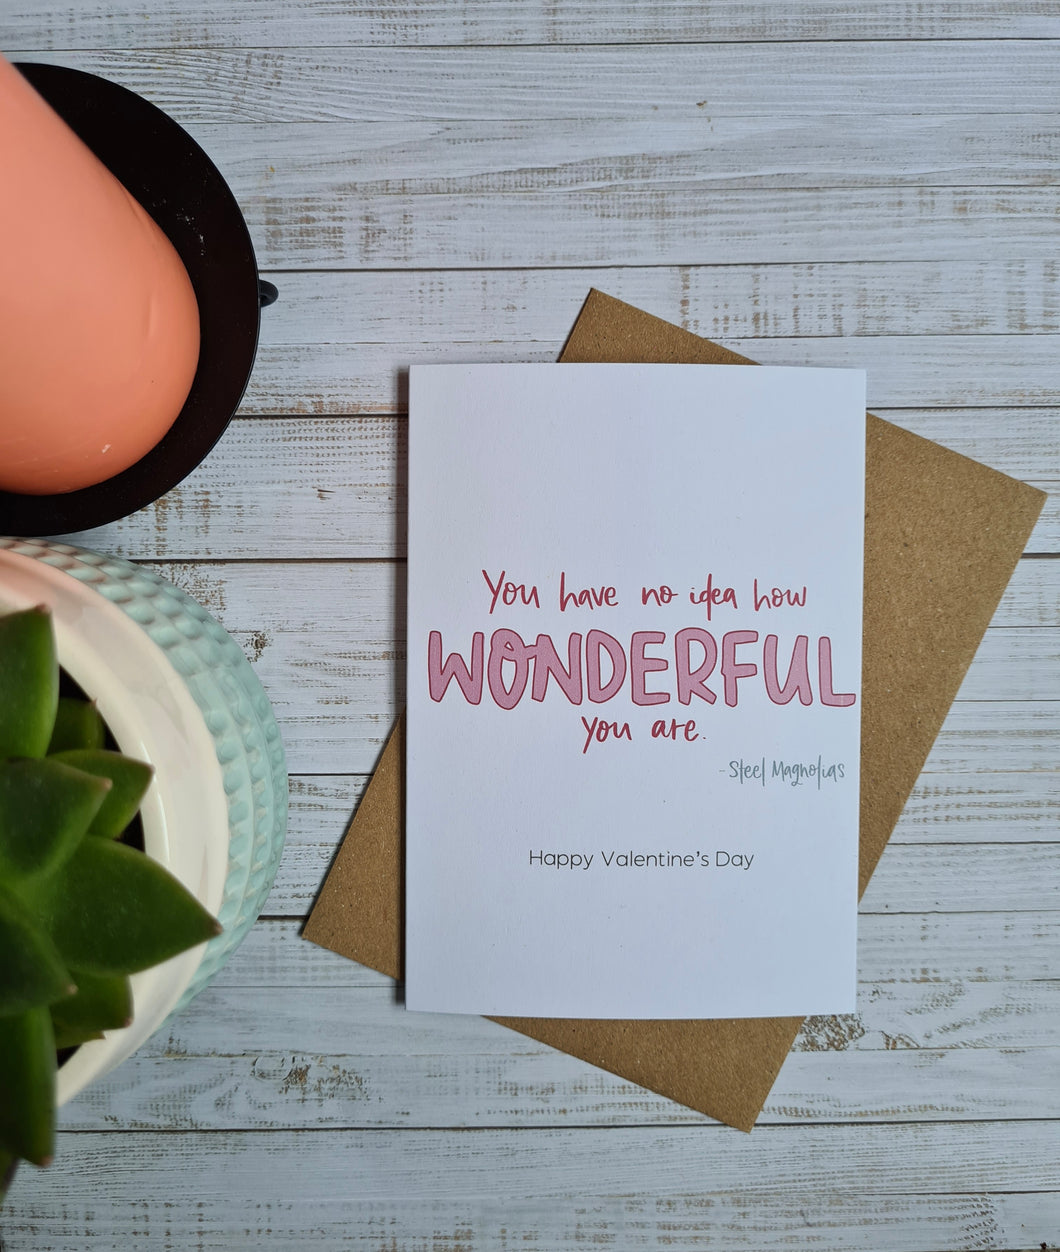 ‘You Have no Idea How Wonderful You Are’ Steel Magnolias Quote Valentine’s Day Card